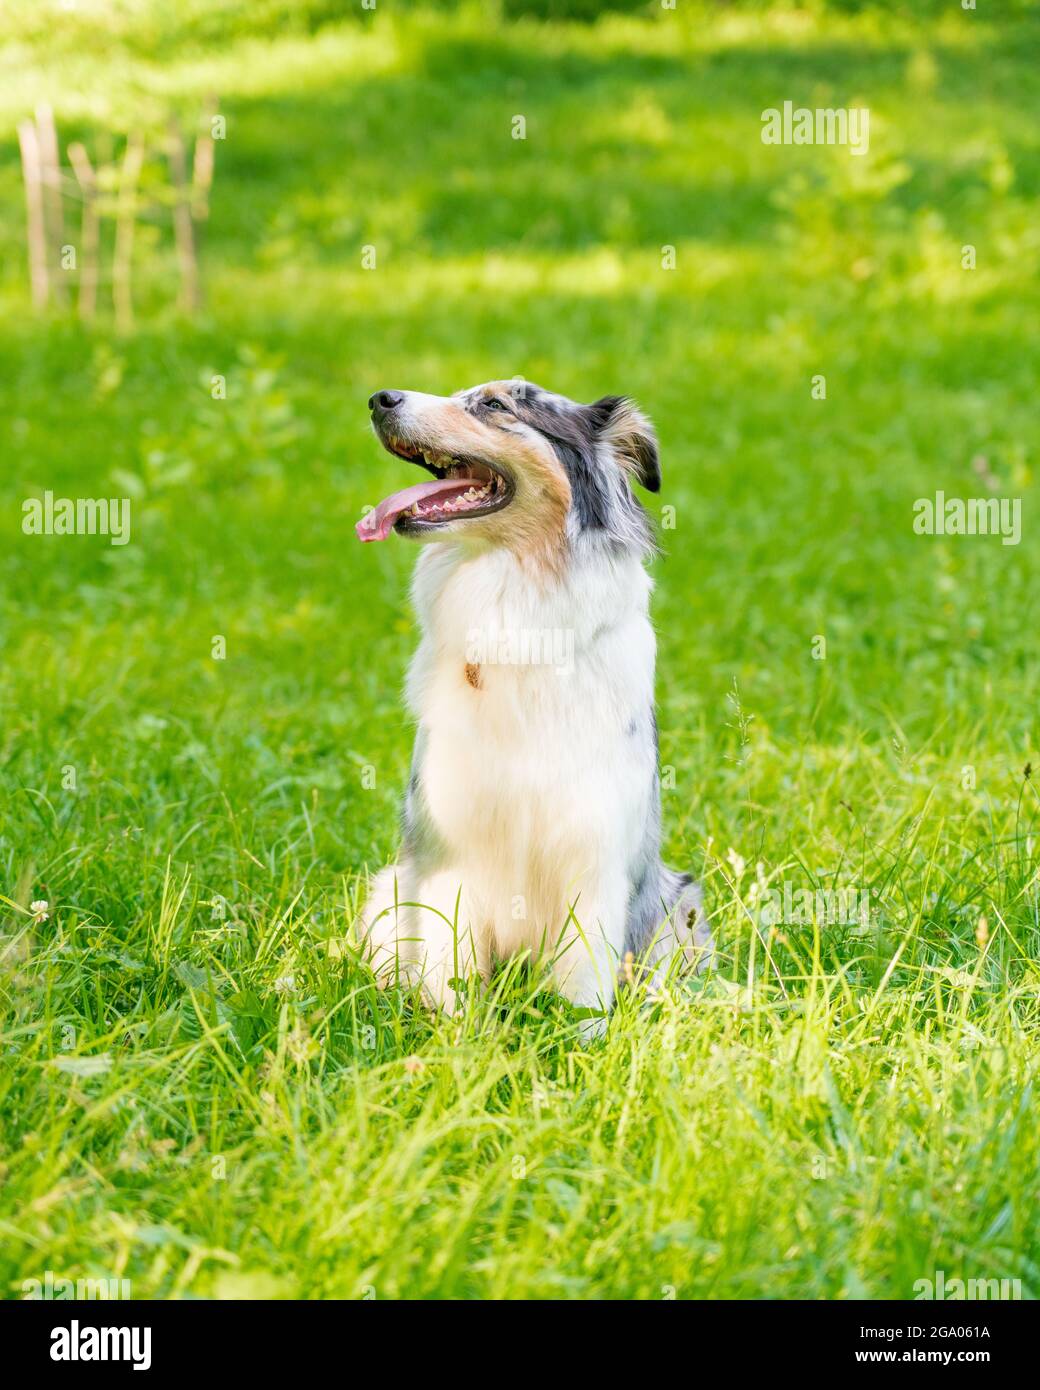 Curious spotted Australian Shepherd dog with one paw raised up sitting in green grass Stock Photo